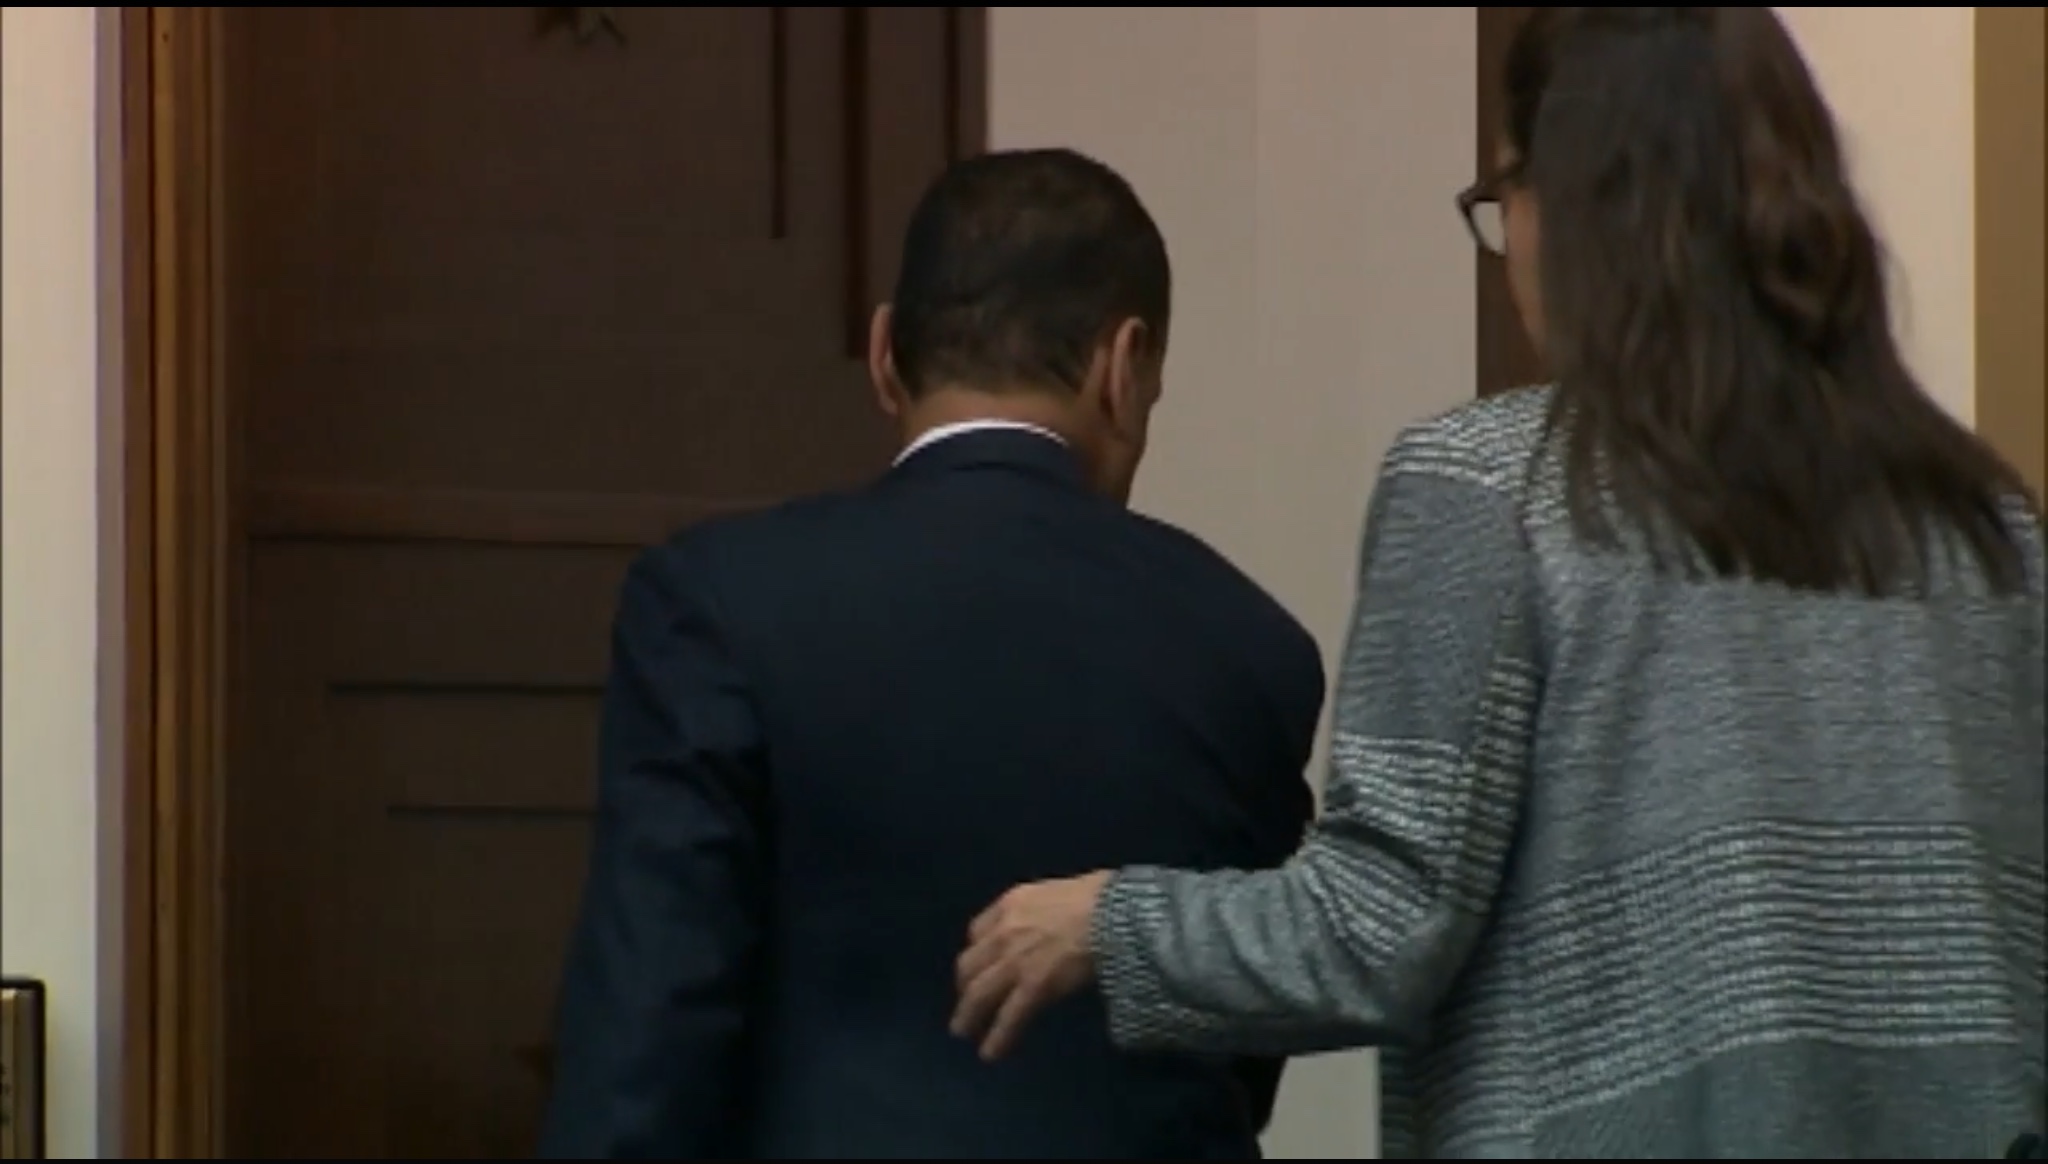 Rep. Luis Gutierrez leaves the room before DHS Secretary Kirstjen Nielsen can address his comments at a House Judiciary Committee hearing, Dec. 20, 2018. Fox News screenshot.